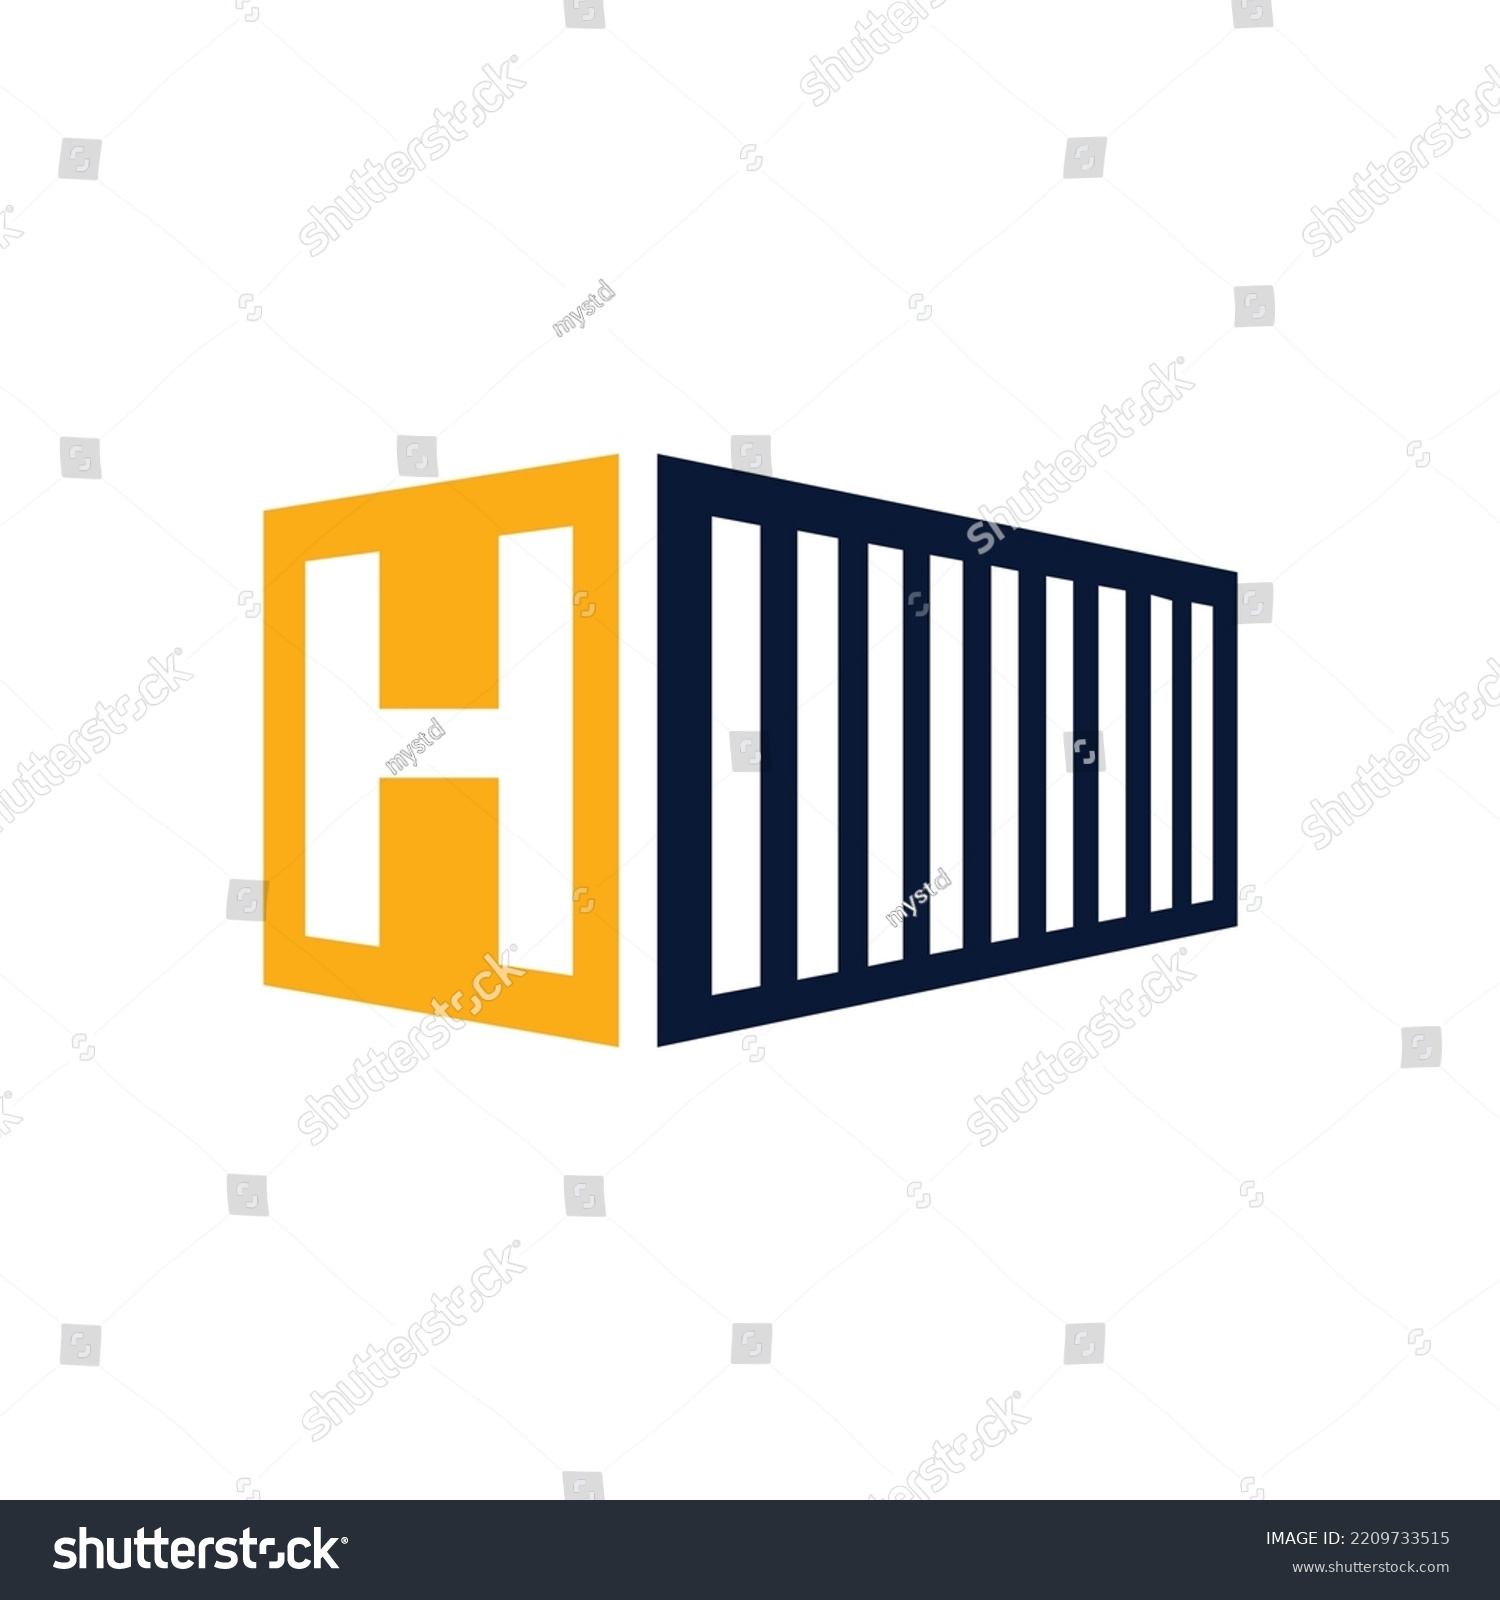 Container logo design with letter H - Royalty Free Stock Vector ...